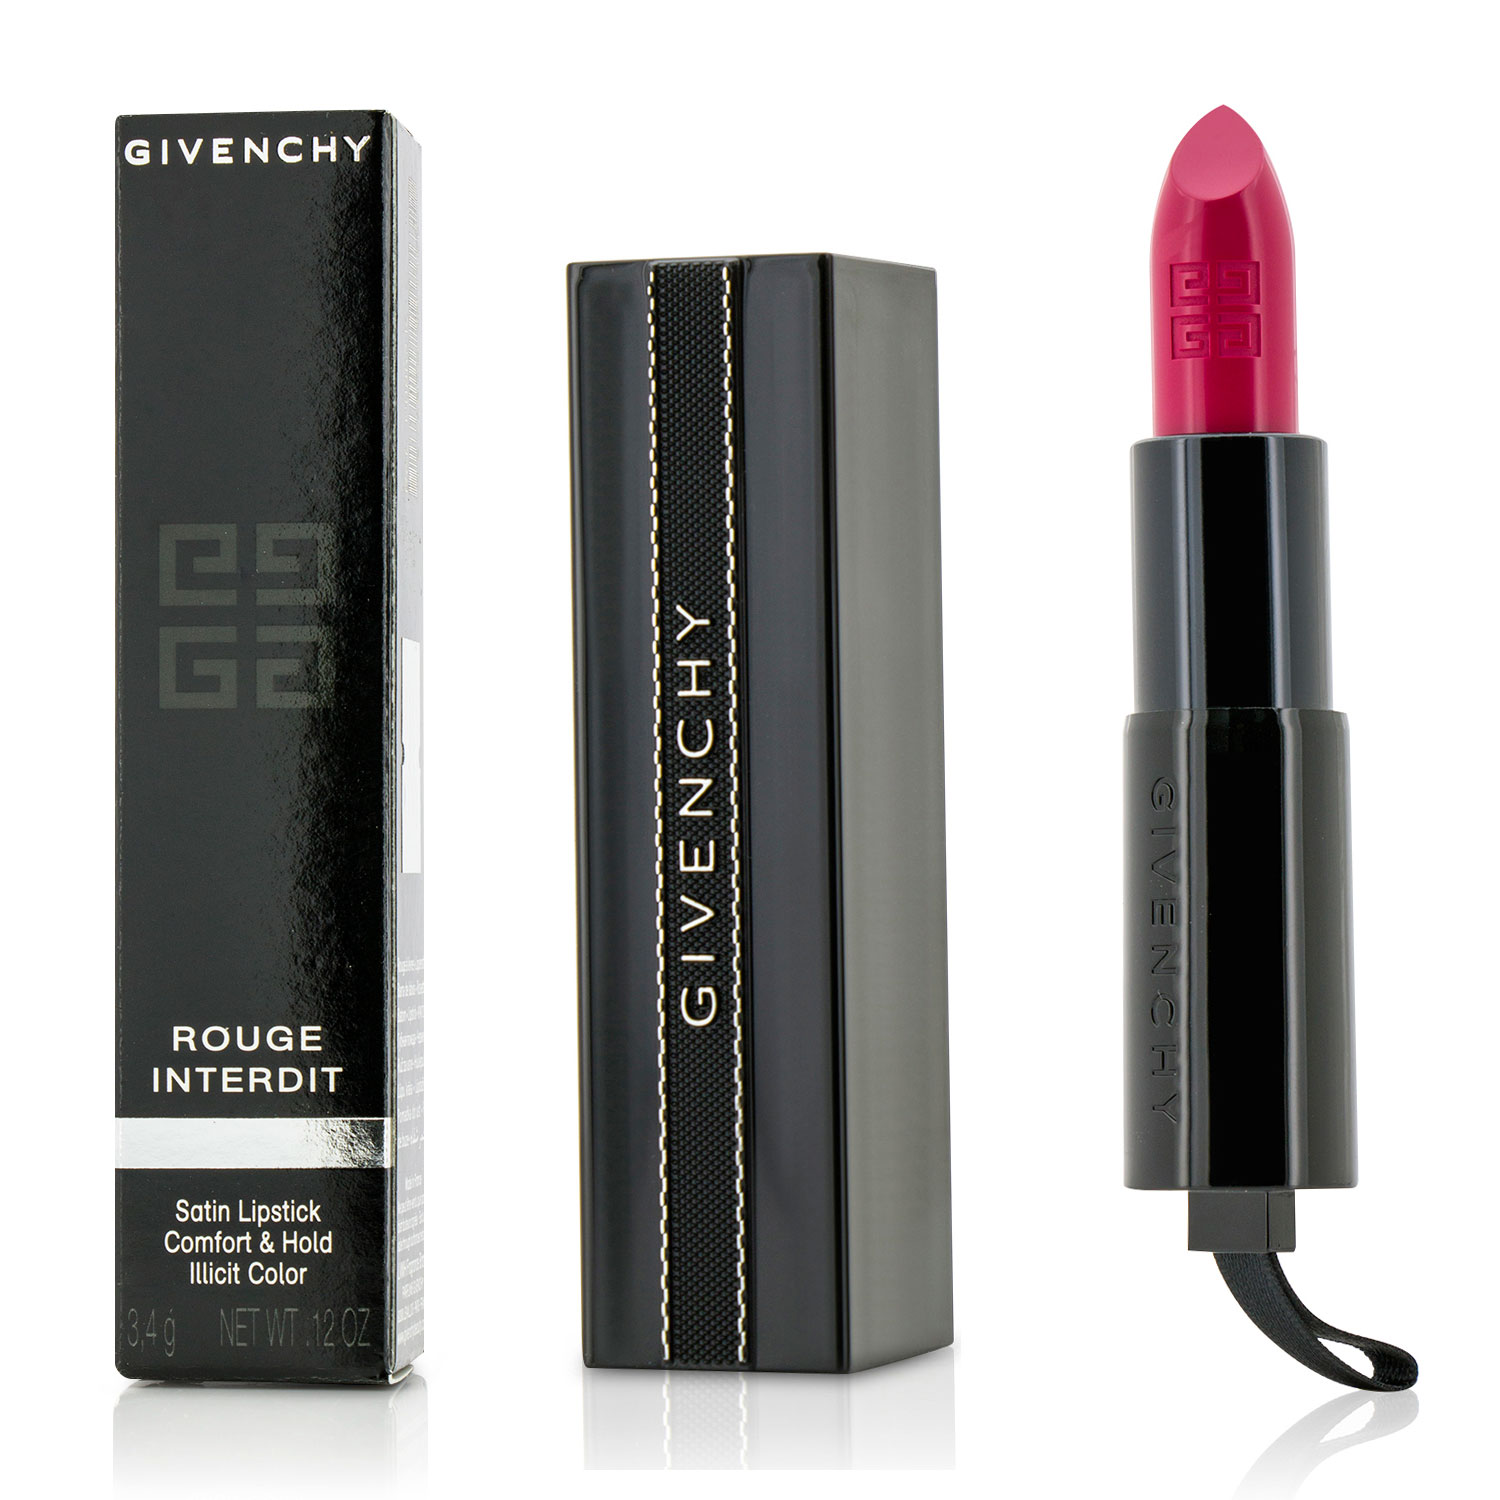 Rouge Interdit Satin Lipstick - # 23 Fuchsia-in-the-know Givenchy Image